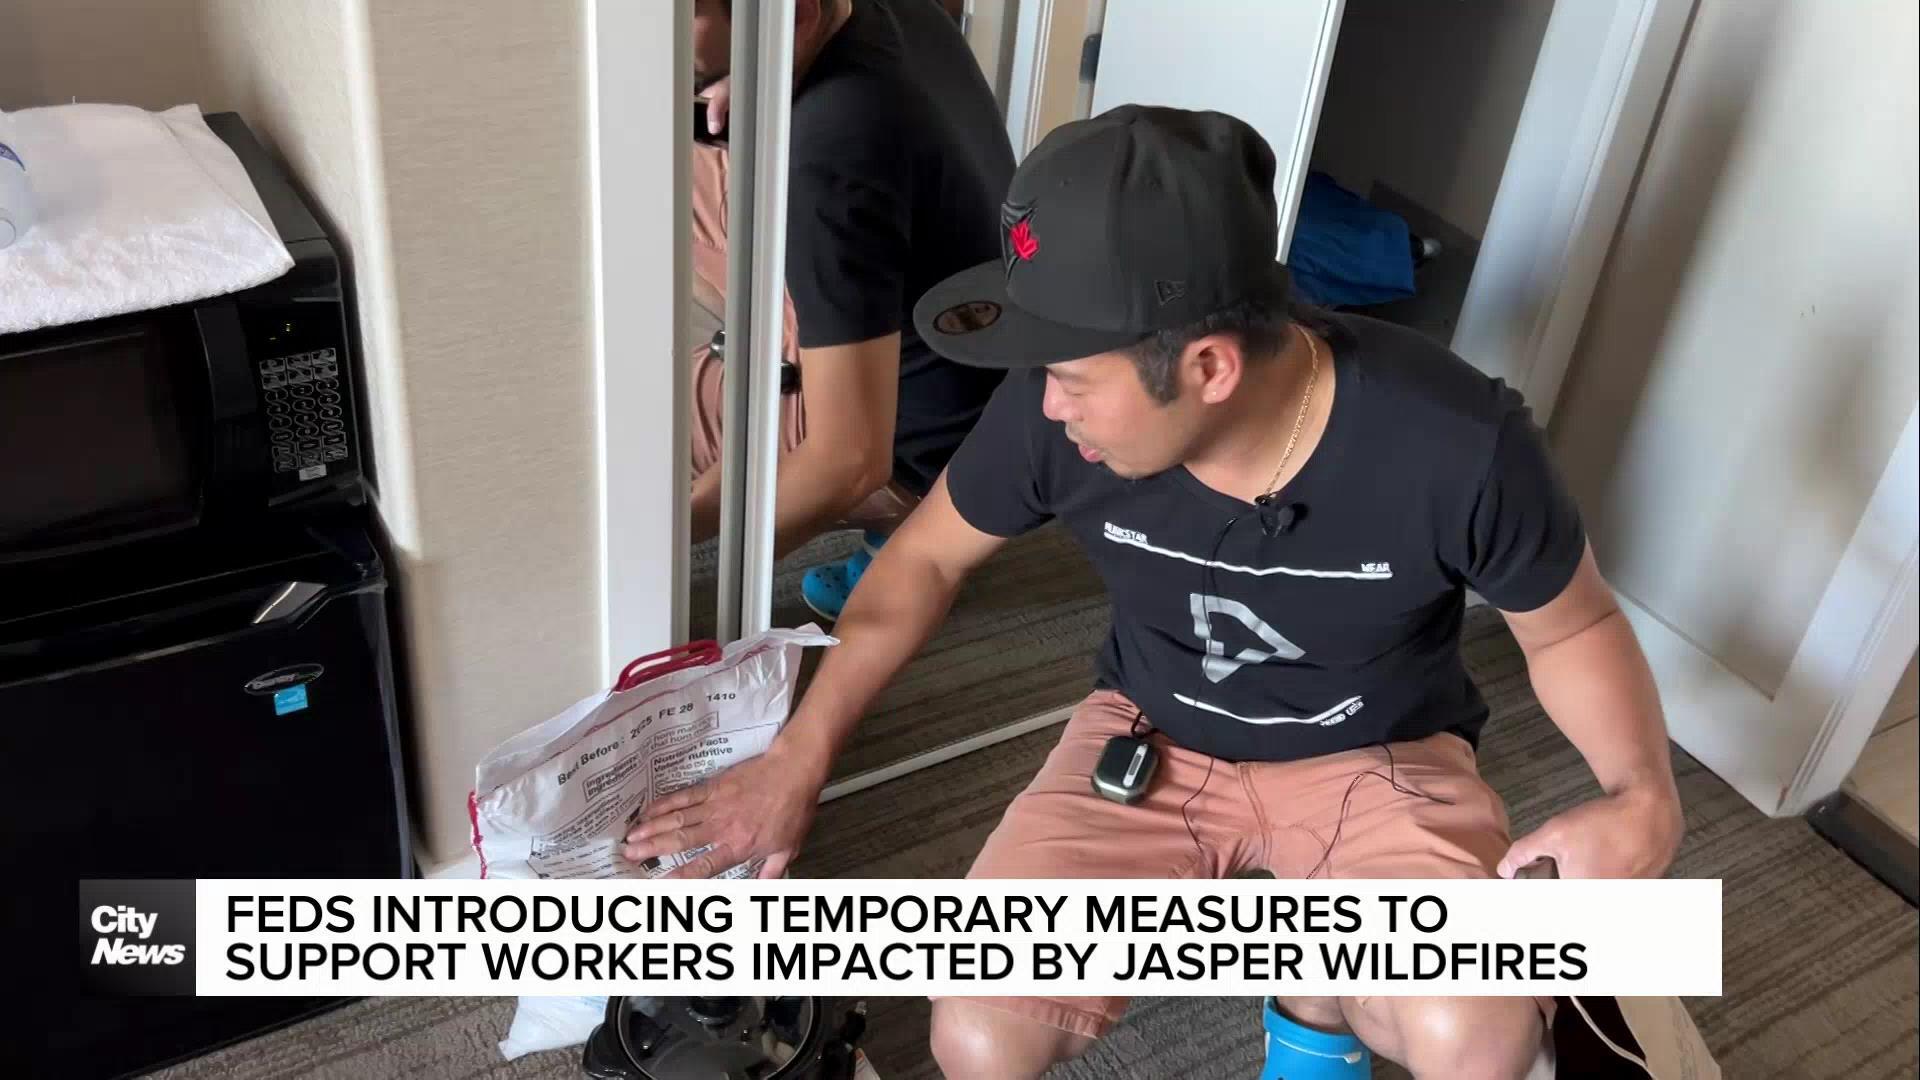 Feds introduce temporary measures to support workers impacted by Jasper wildfires